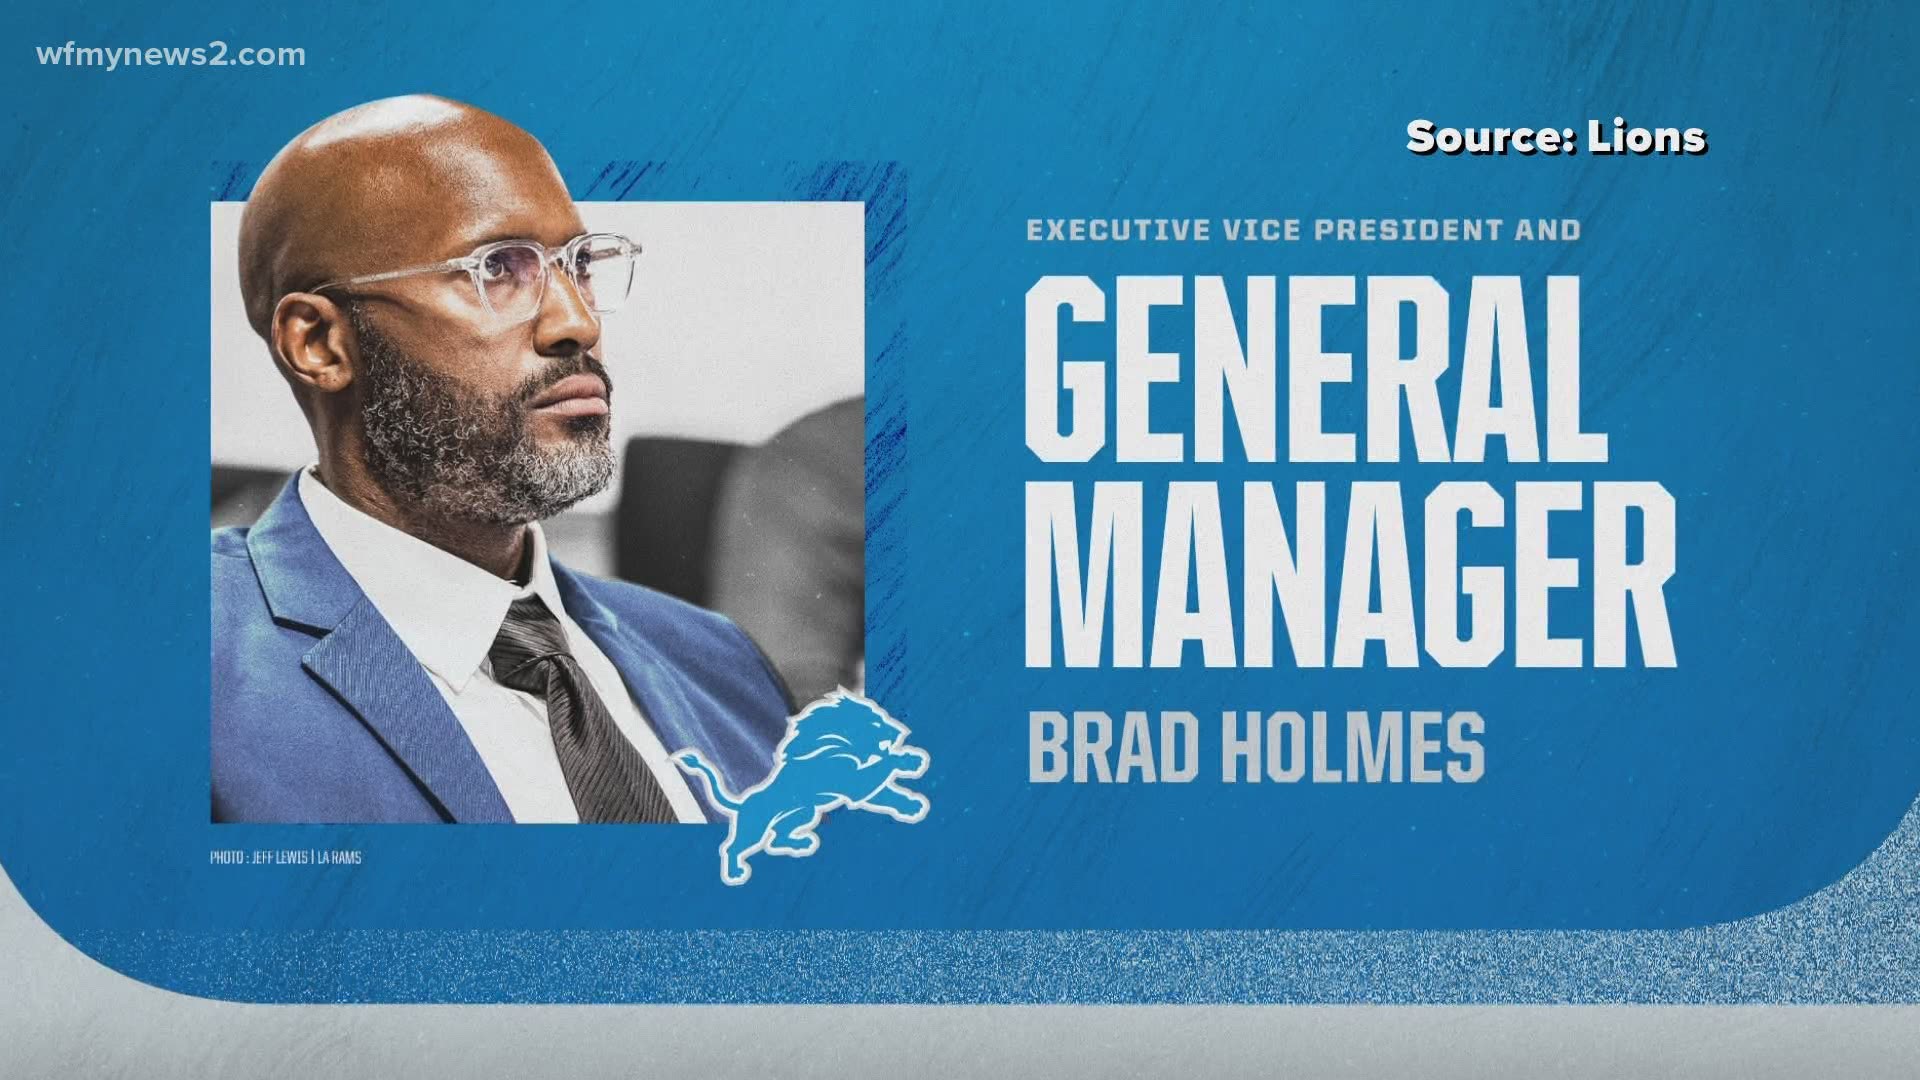 Brad Holmes has been named the executive vice president and general manager of the Detroit Lions.